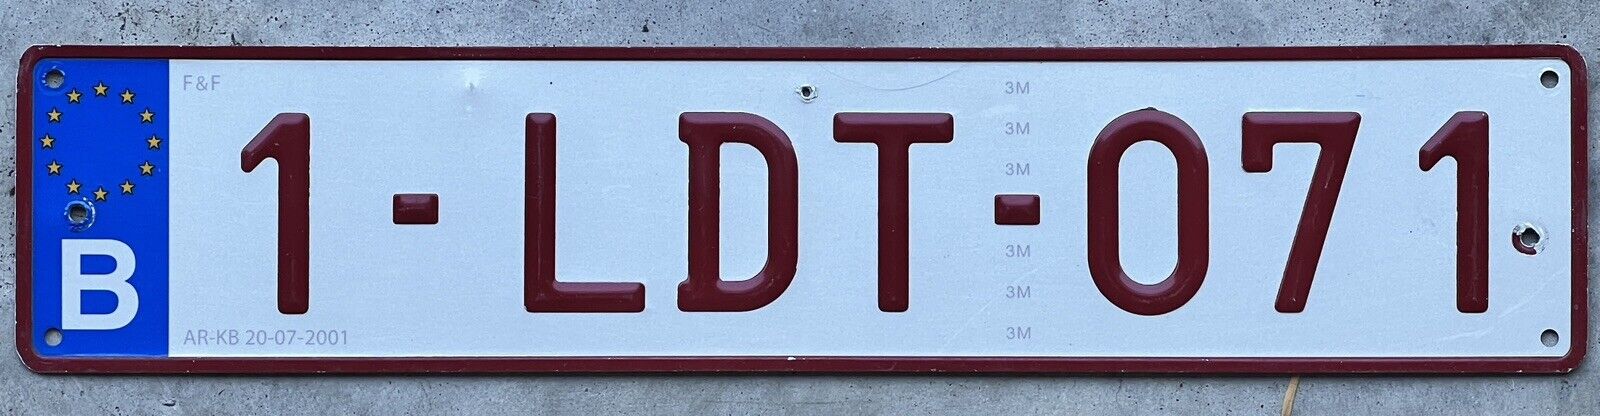 BELGIUM UNUSED LICENSE PLATE RED LETTERS ON WHITE #1LDT071